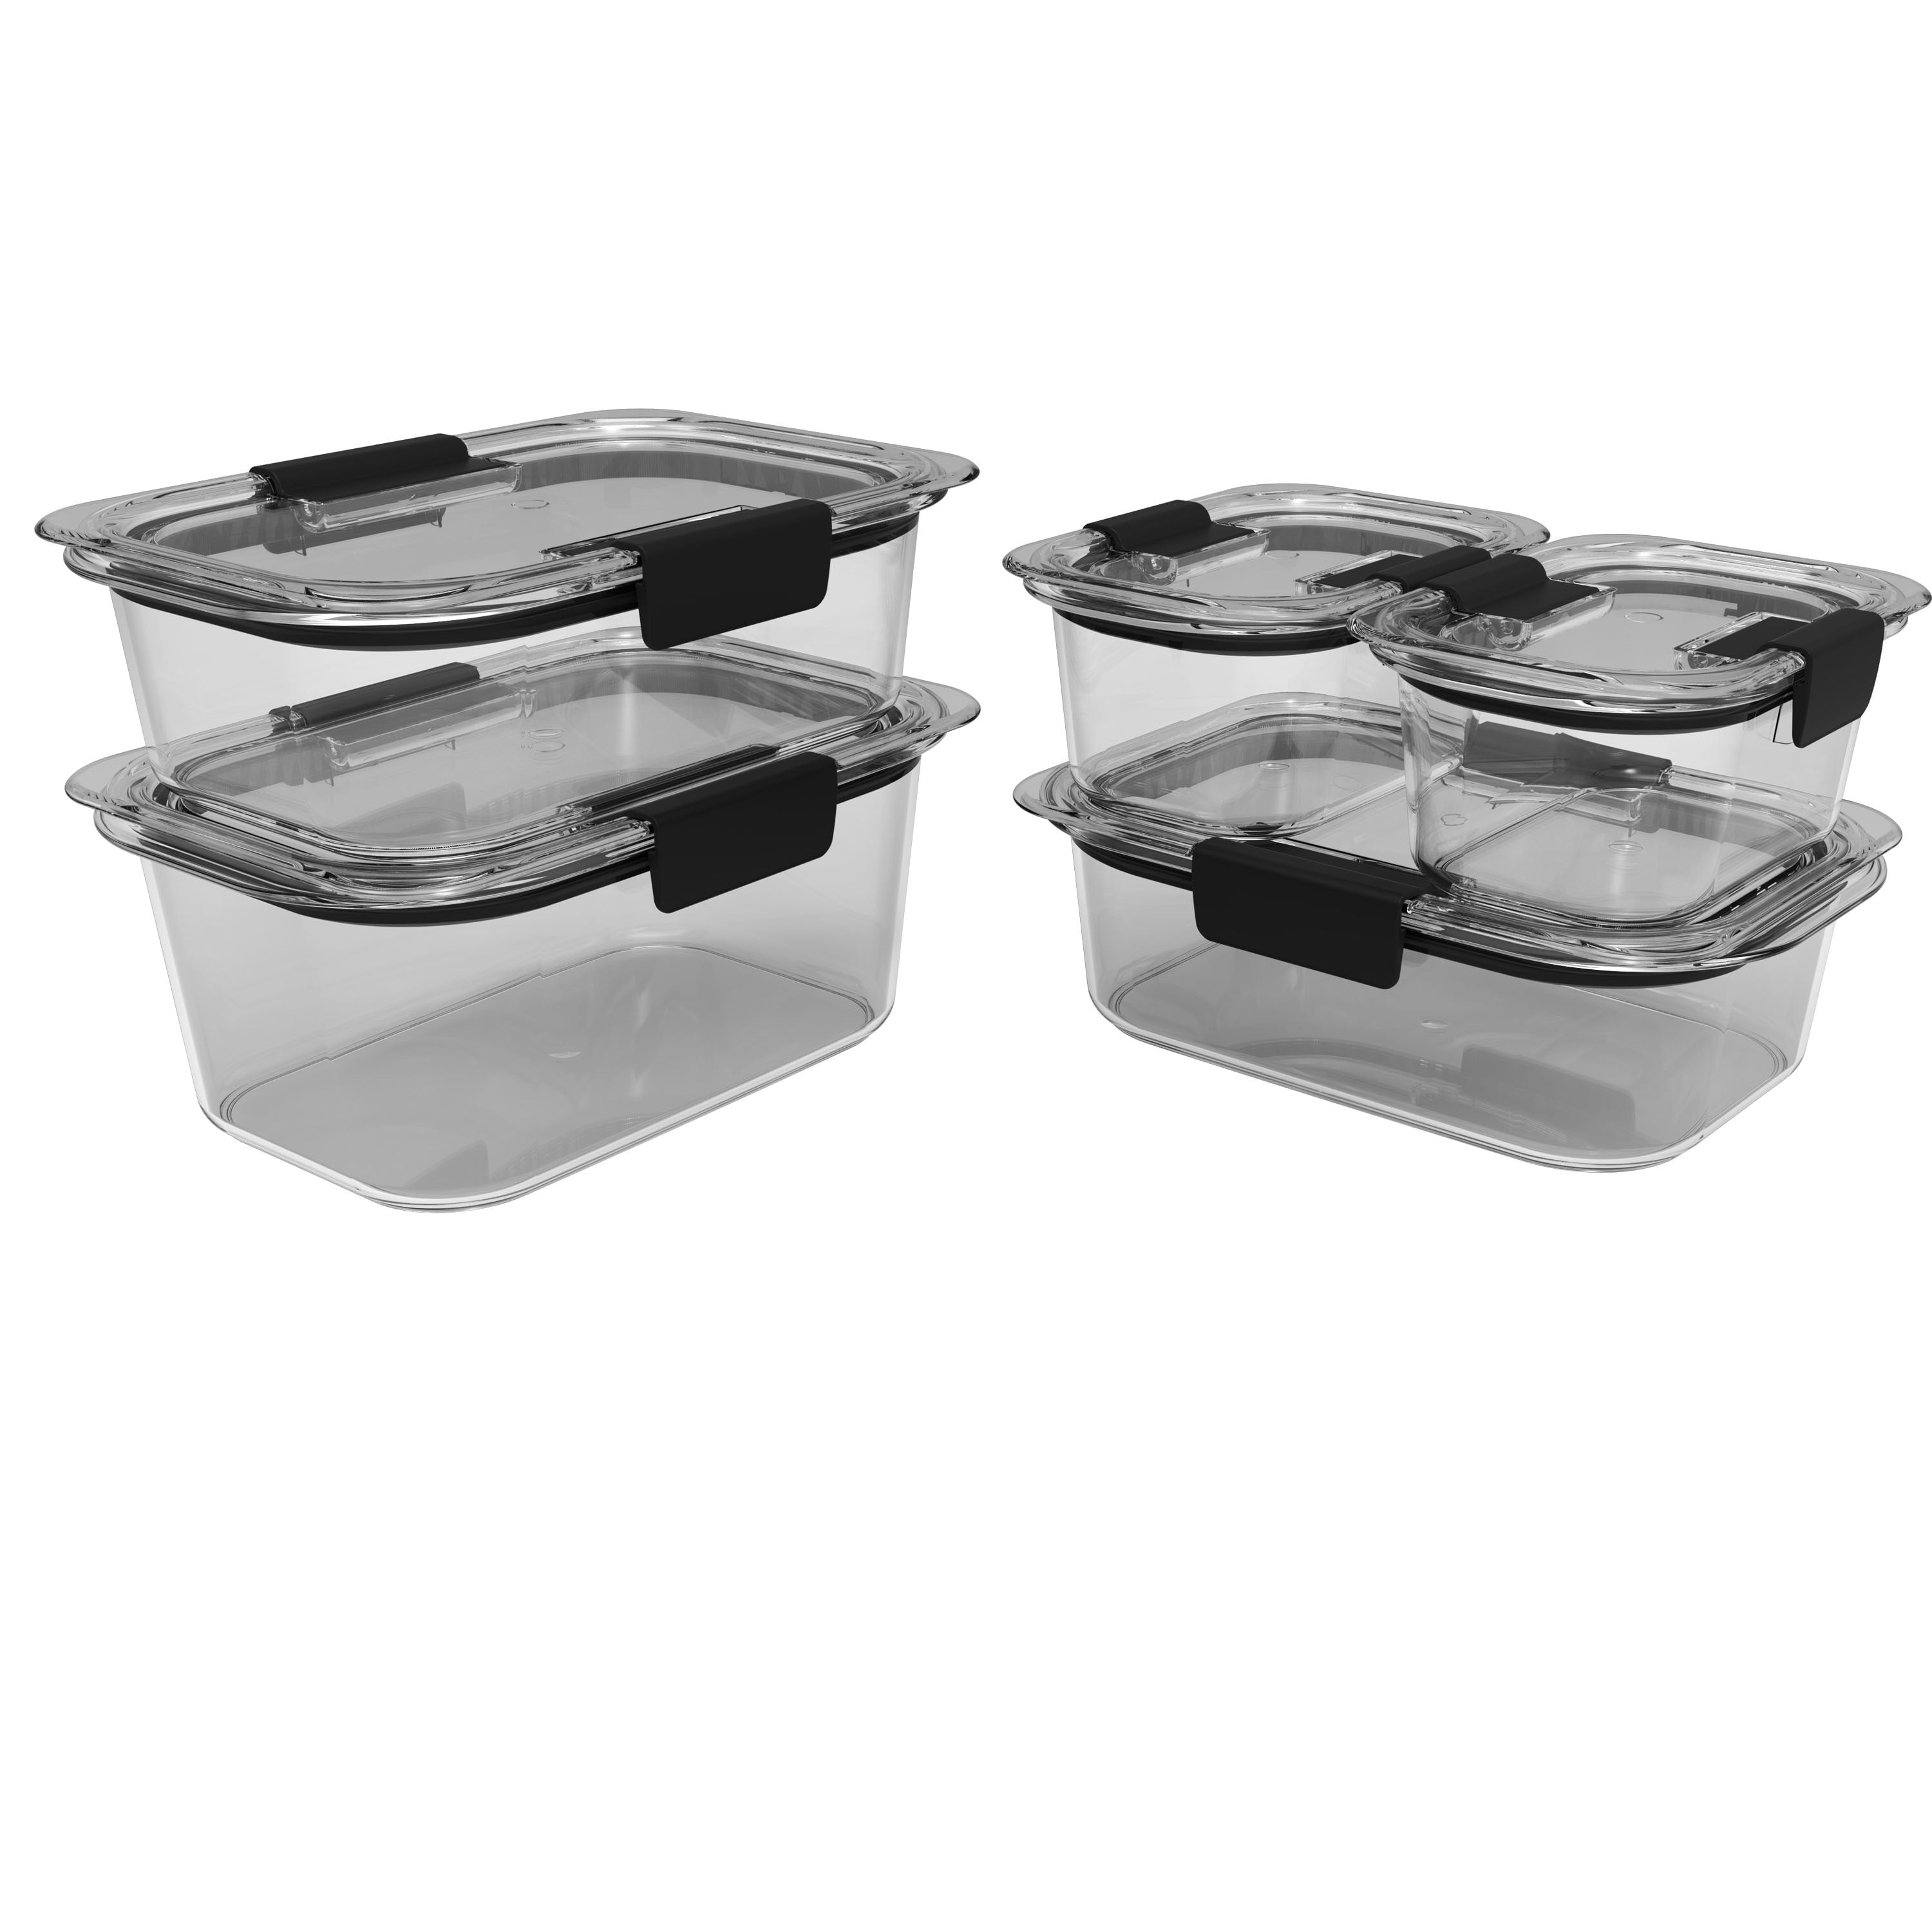 Tribello Clear Plastic Storage Bins with Lids Stackable Storage